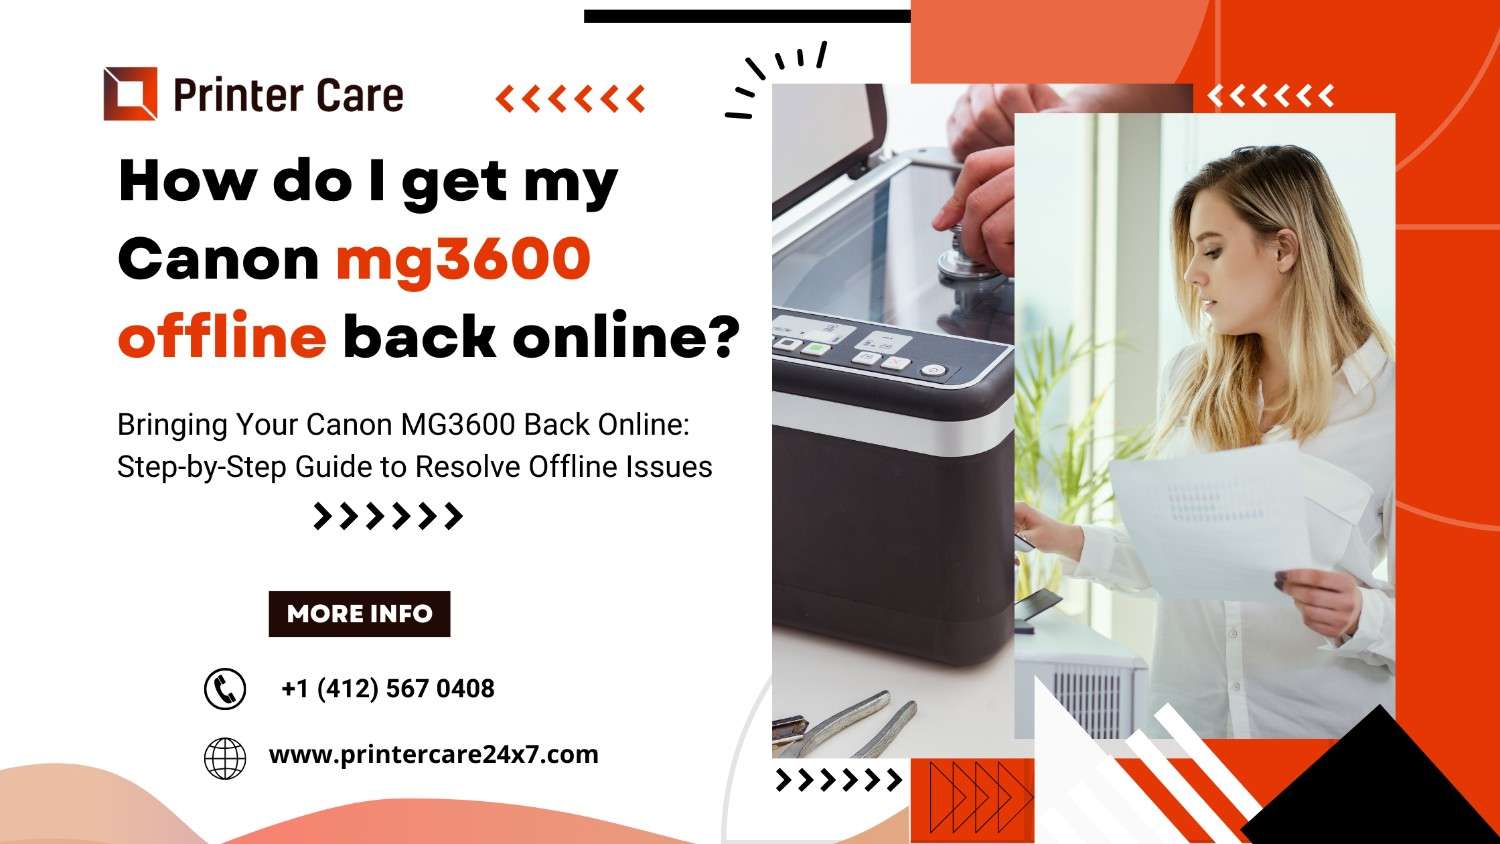 How do I get my Canon mg3600 offline back online |+1 (412) 567 0408 - TheOmniBuzz